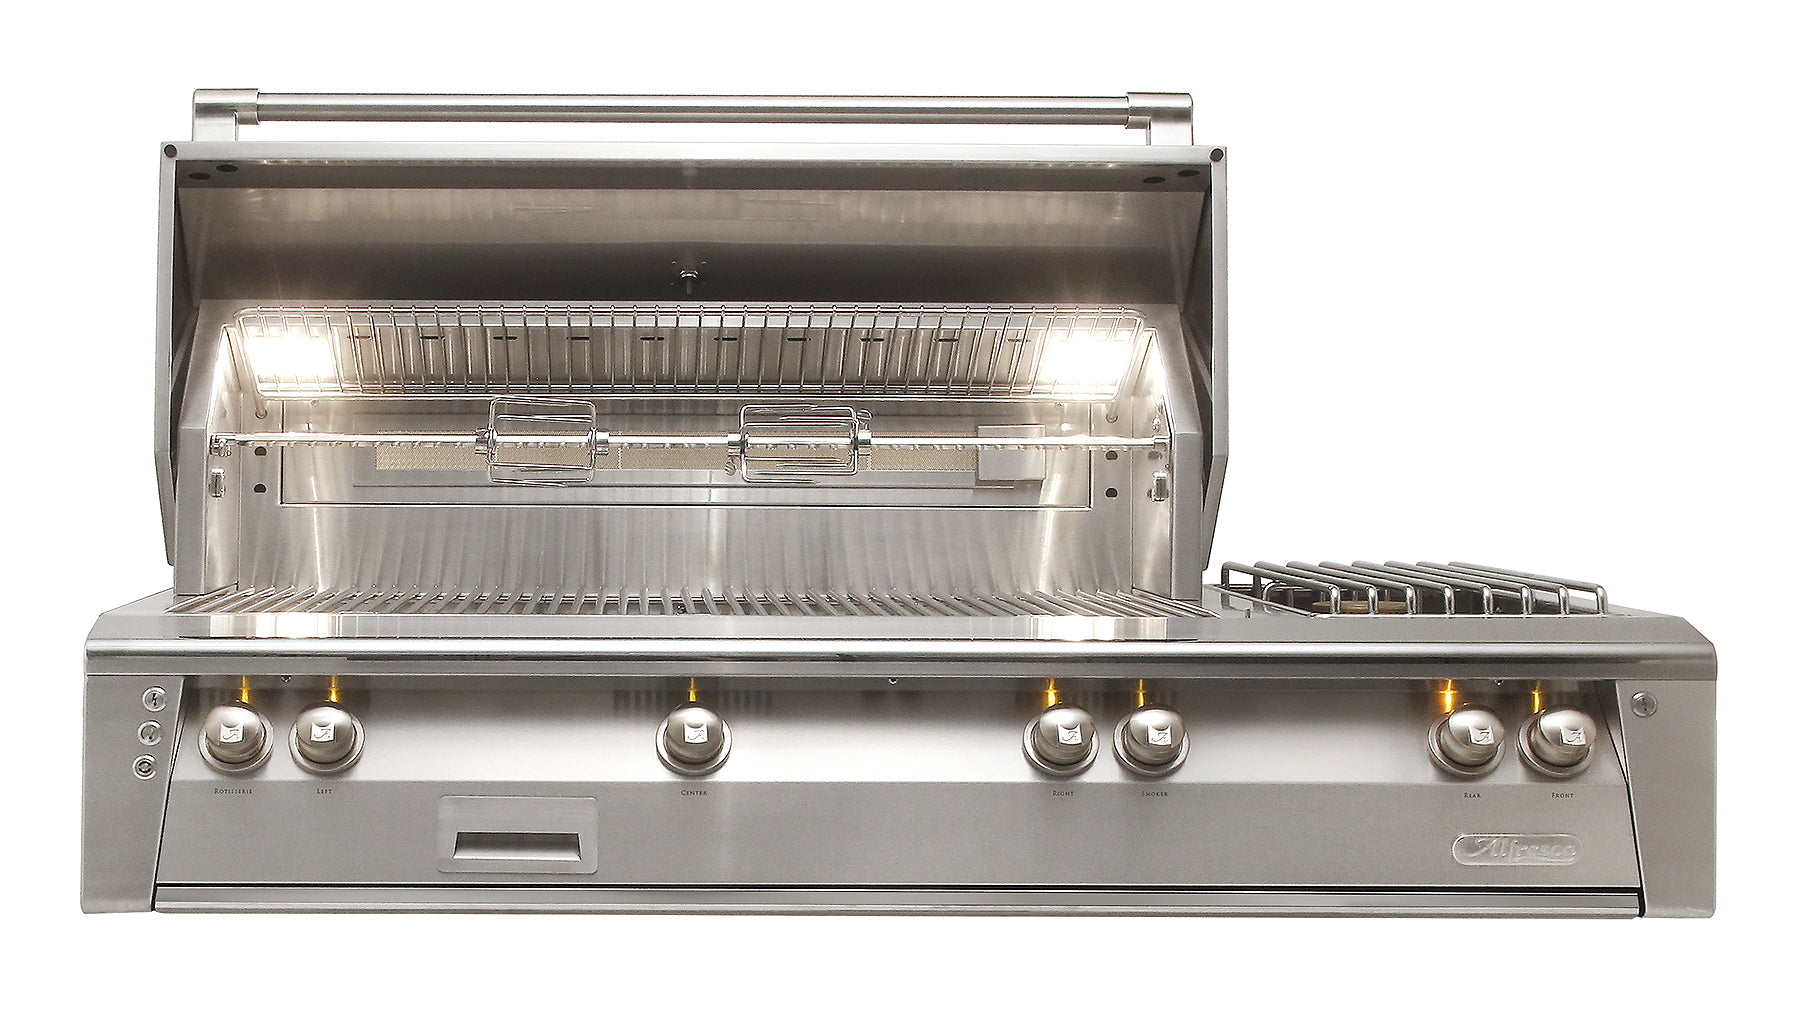 Alfresco - 3 Burner Natural Gas BBQ in Stainless - ALXE-56